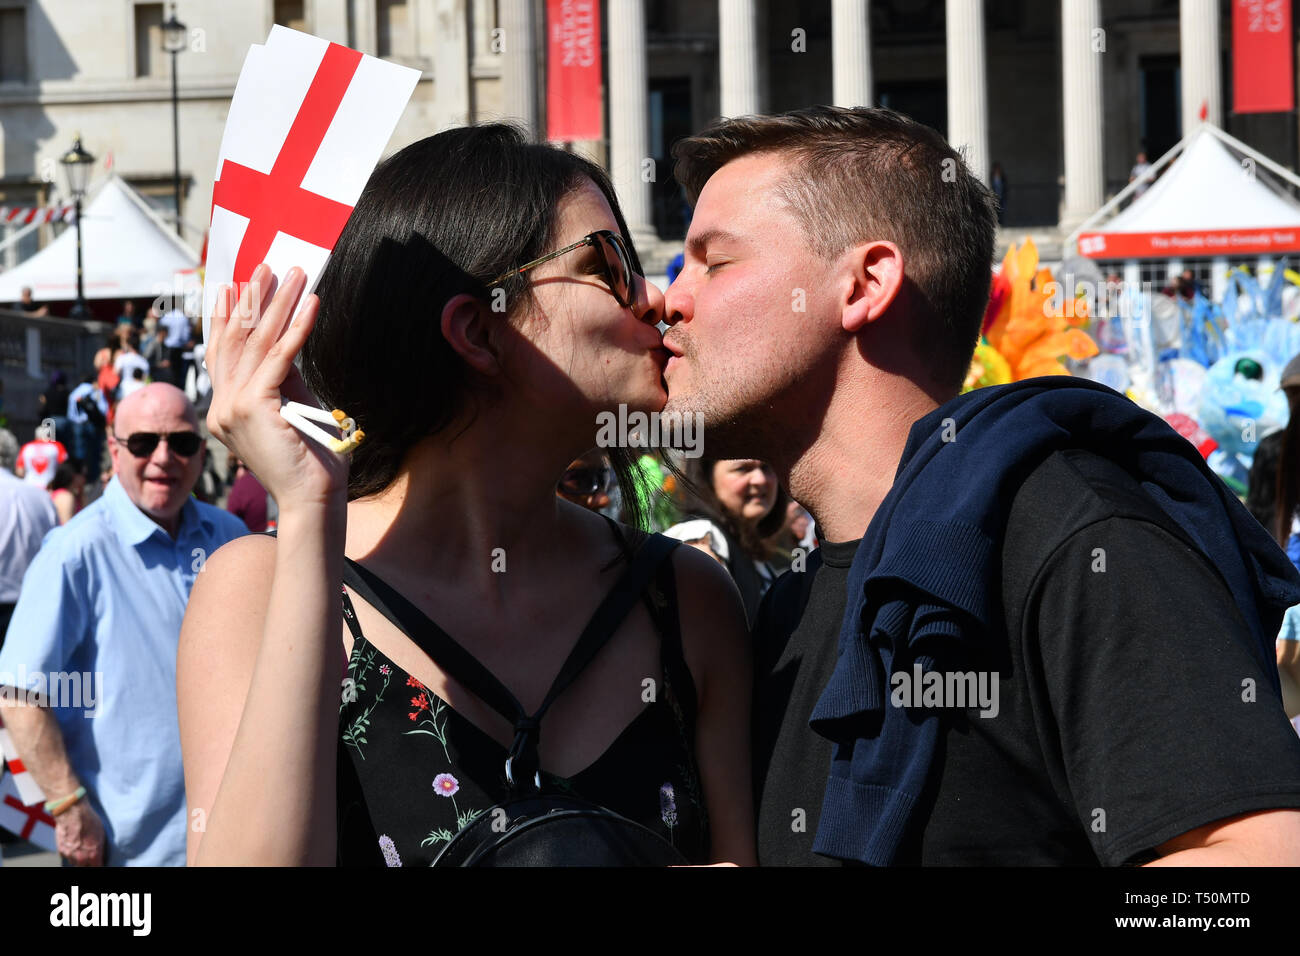 London, UK. 20th April, 2019.Hundreds attend the Feast of St George to celebrate English culture with music and English food stalls in Trafalgar Square on 20 April 2019, London, UK. Credit: Picture Capital/Alamy Live News Stock Photo